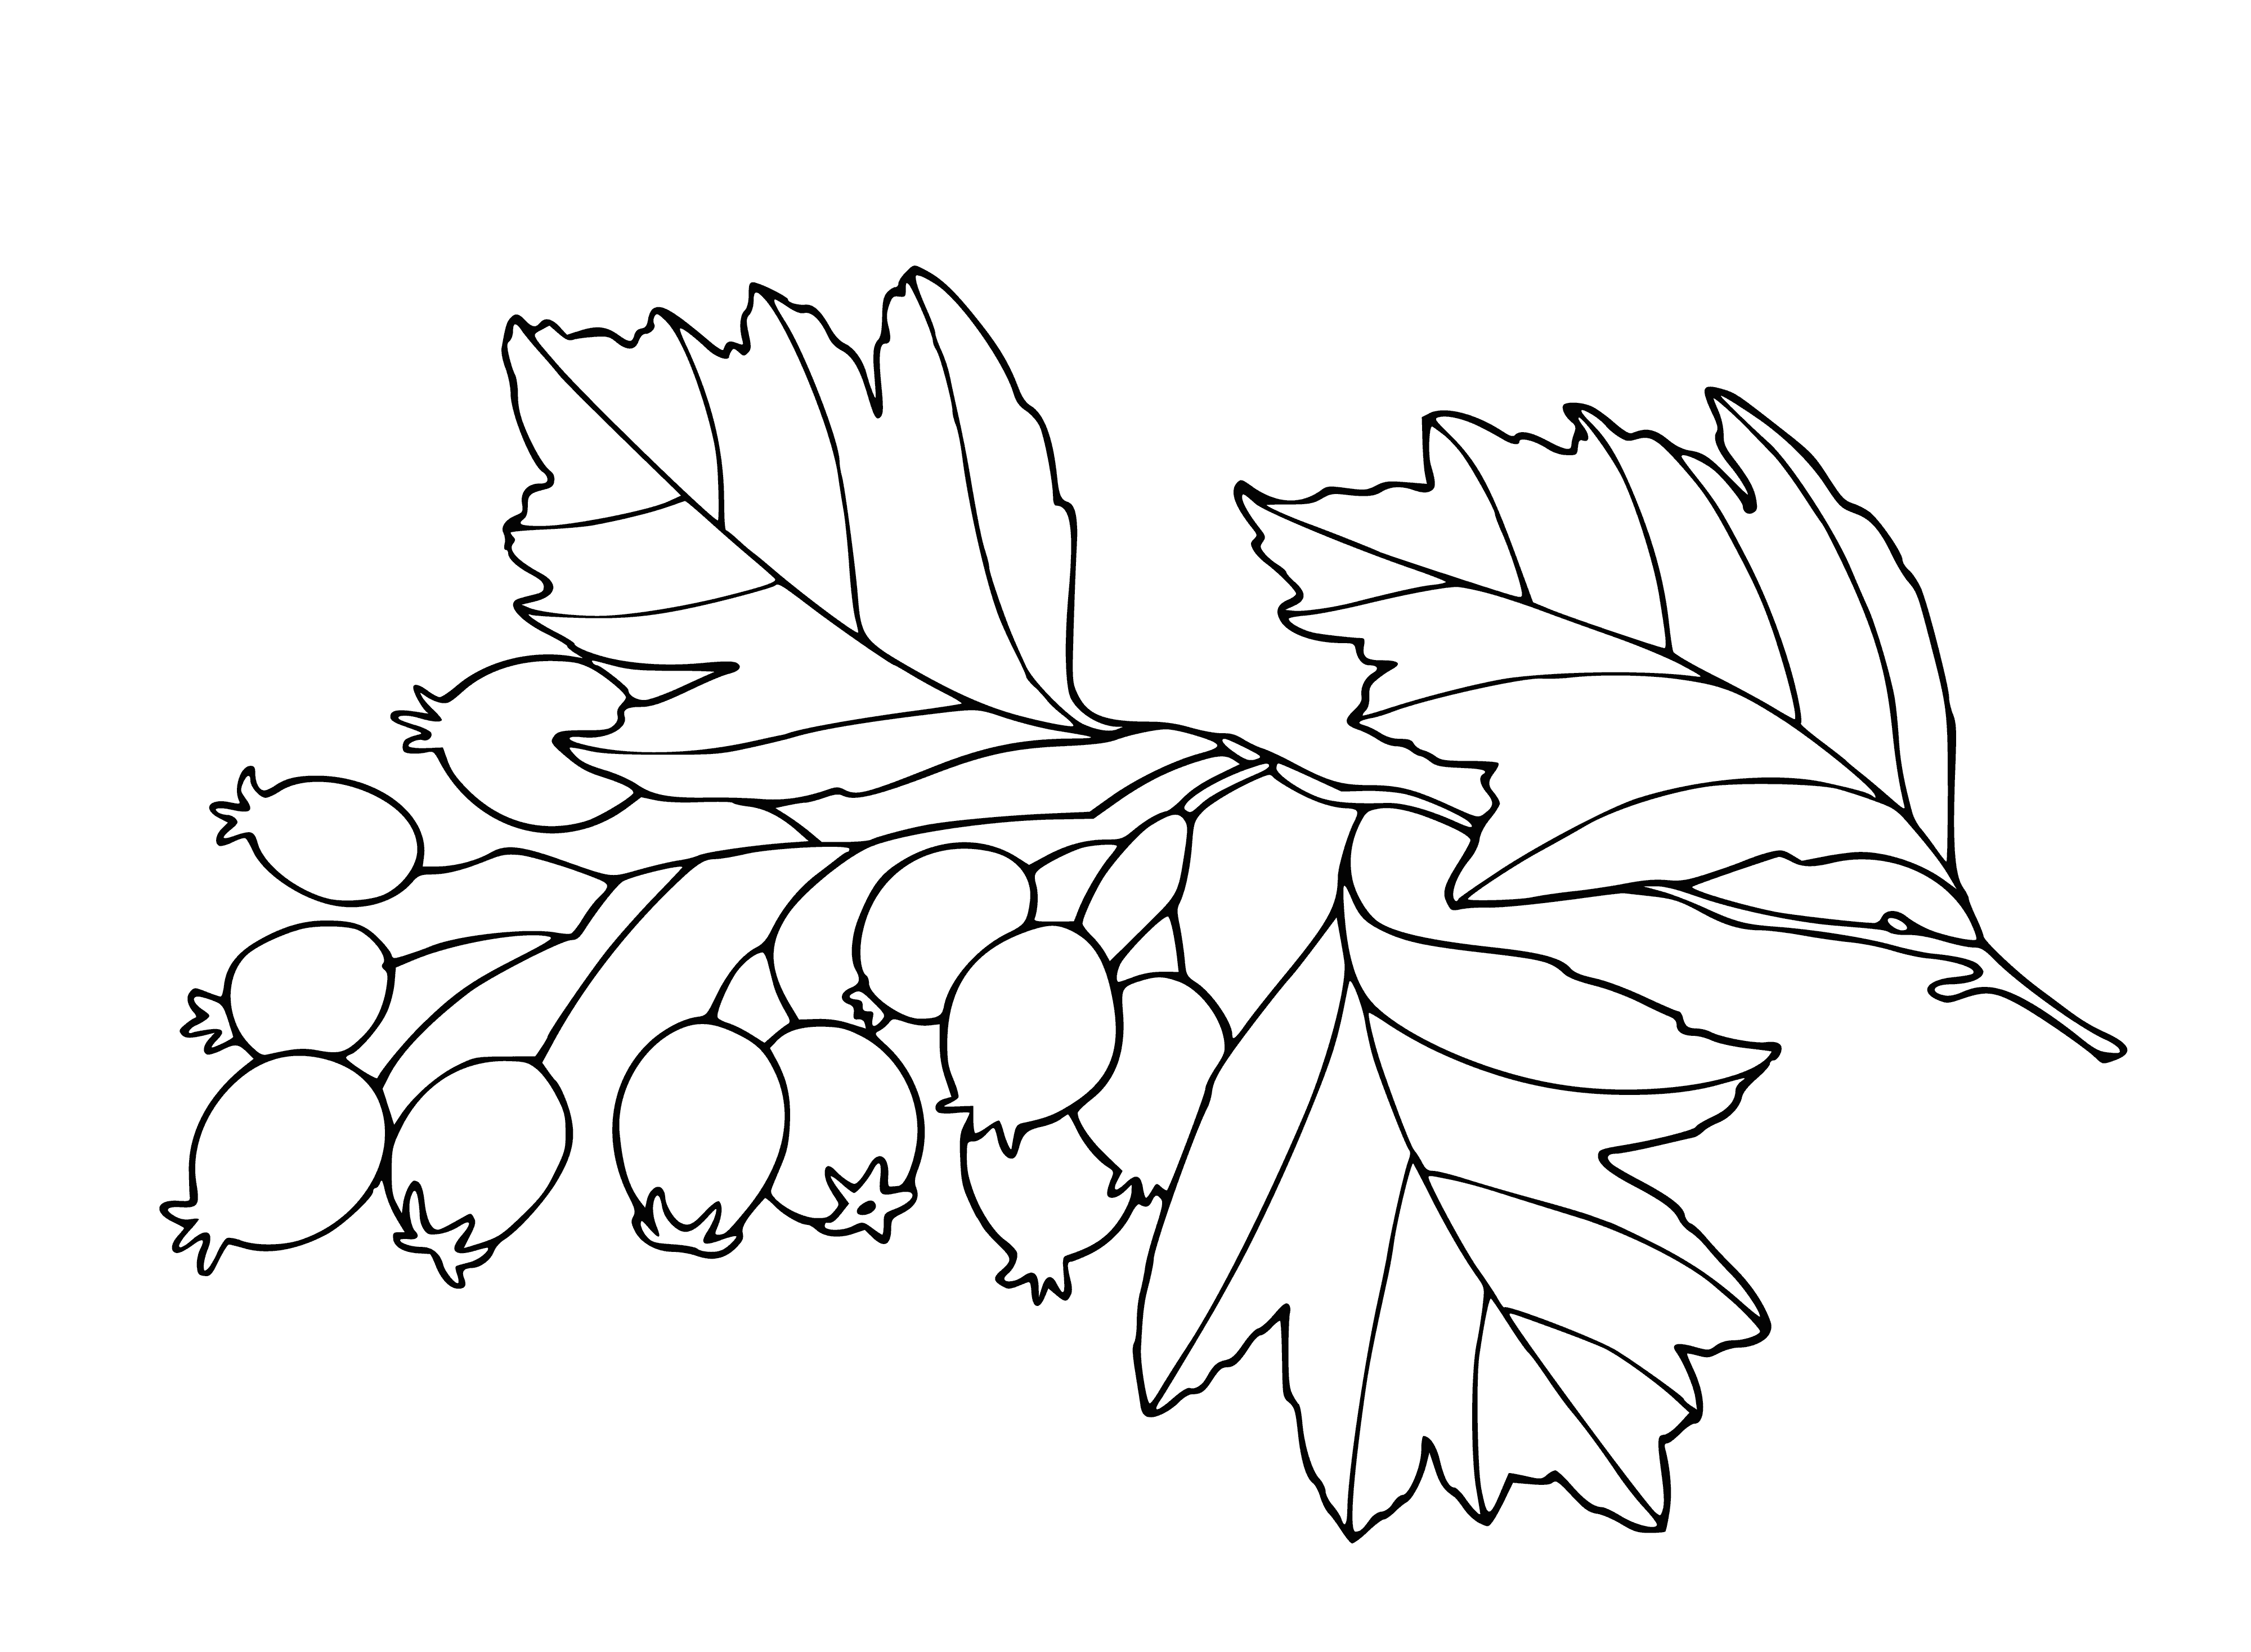 coloring page: Small, red berries in bunches on long, green stems; green leaves visible in the background.